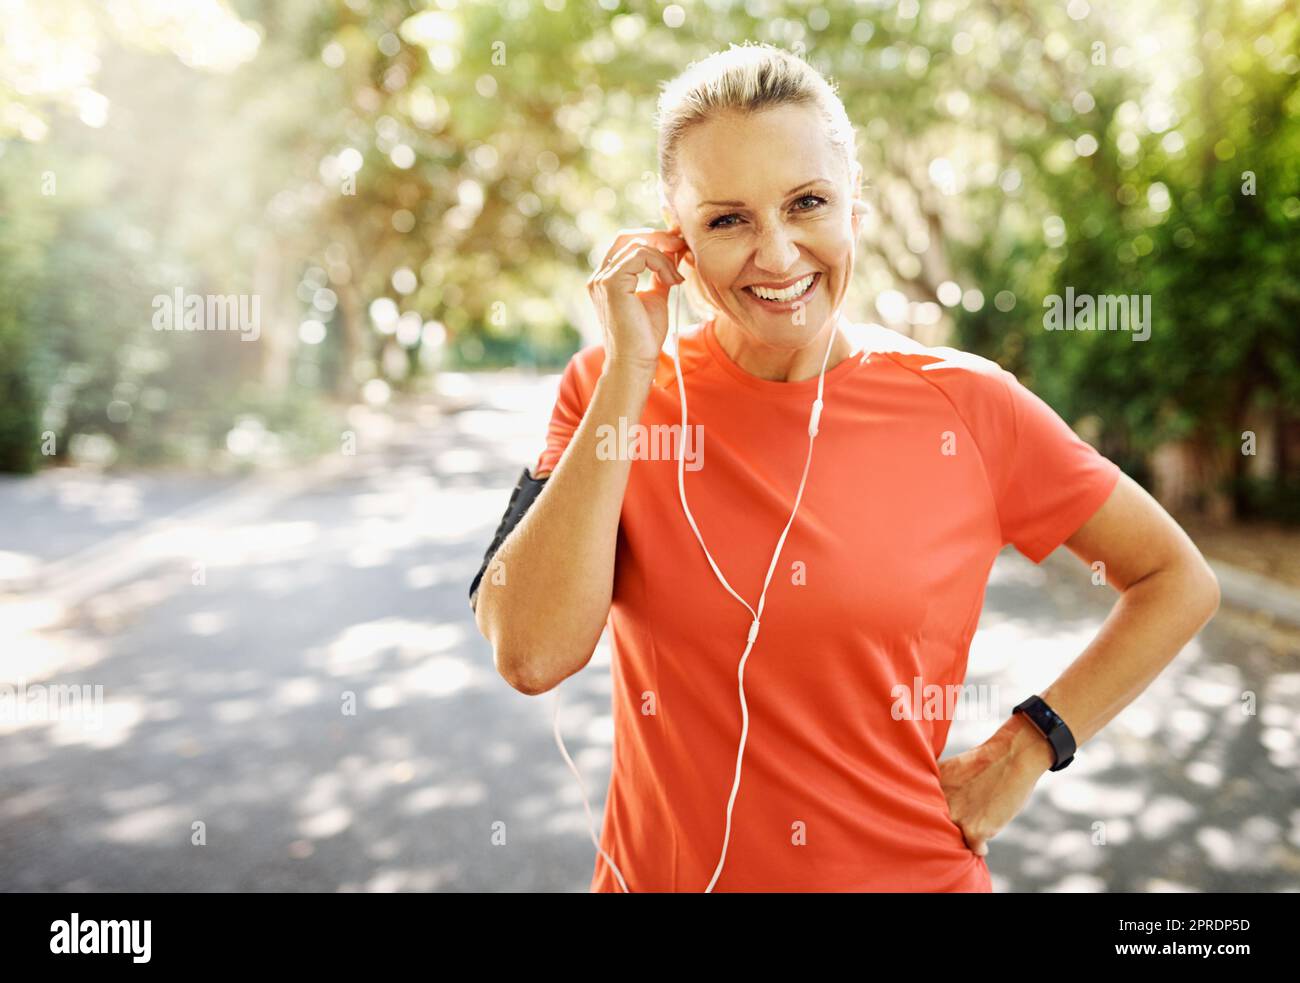 Fit female athlete going for morning run, adjusting earphones, listening to music. Happy, healthy sports woman smiling, about to do cardio wellness exercise or take endurance training workout break. Stock Photo